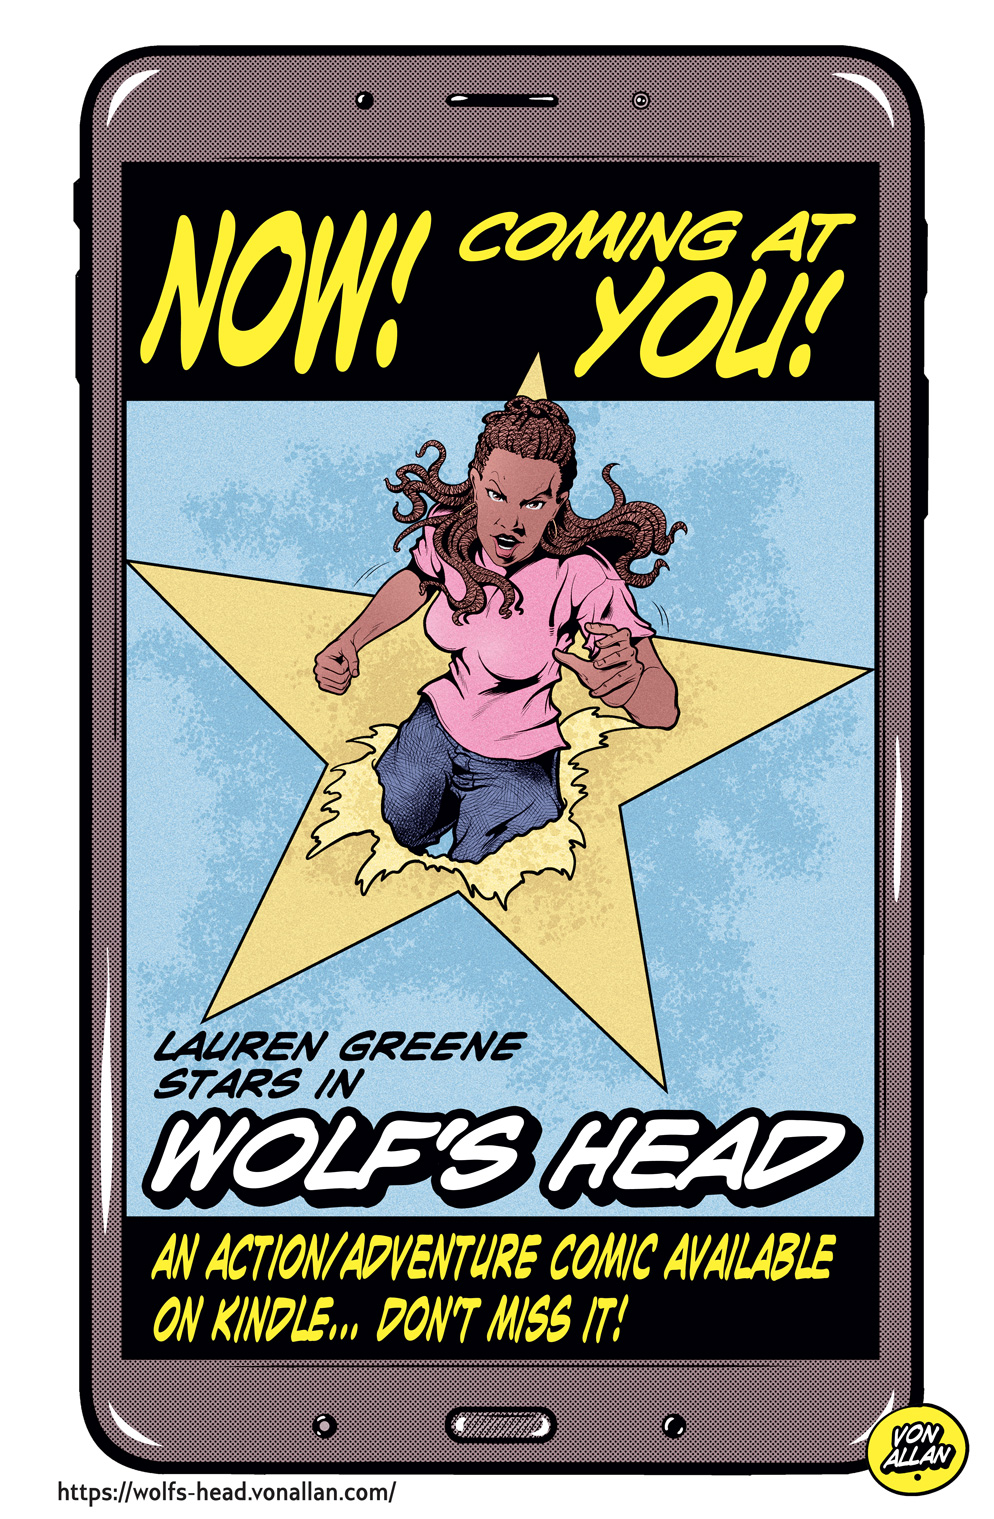 Teaser image for the Wolf's Head comic book series by Von Allan